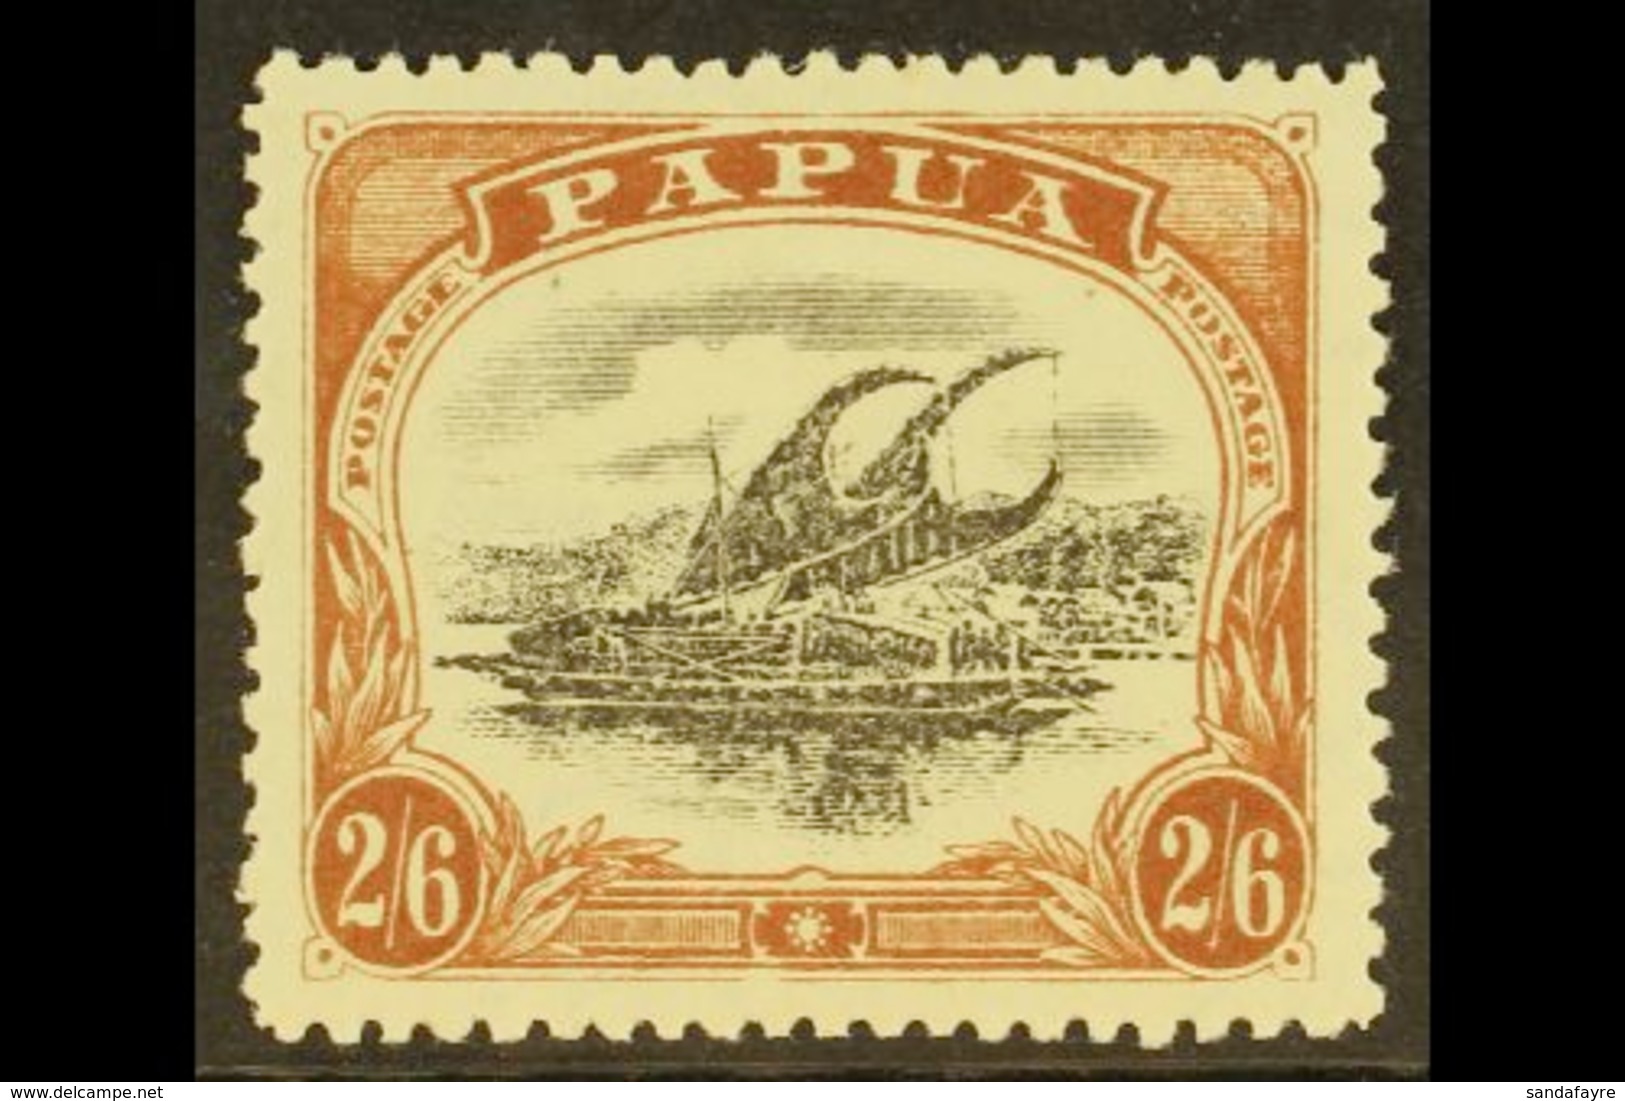 1910 2s 6d Black And Brown, Large Papua, Wmk Upright, P 12½, Type C, SG 83, Very Fine Well Centered Mint. For More Image - Papoea-Nieuw-Guinea